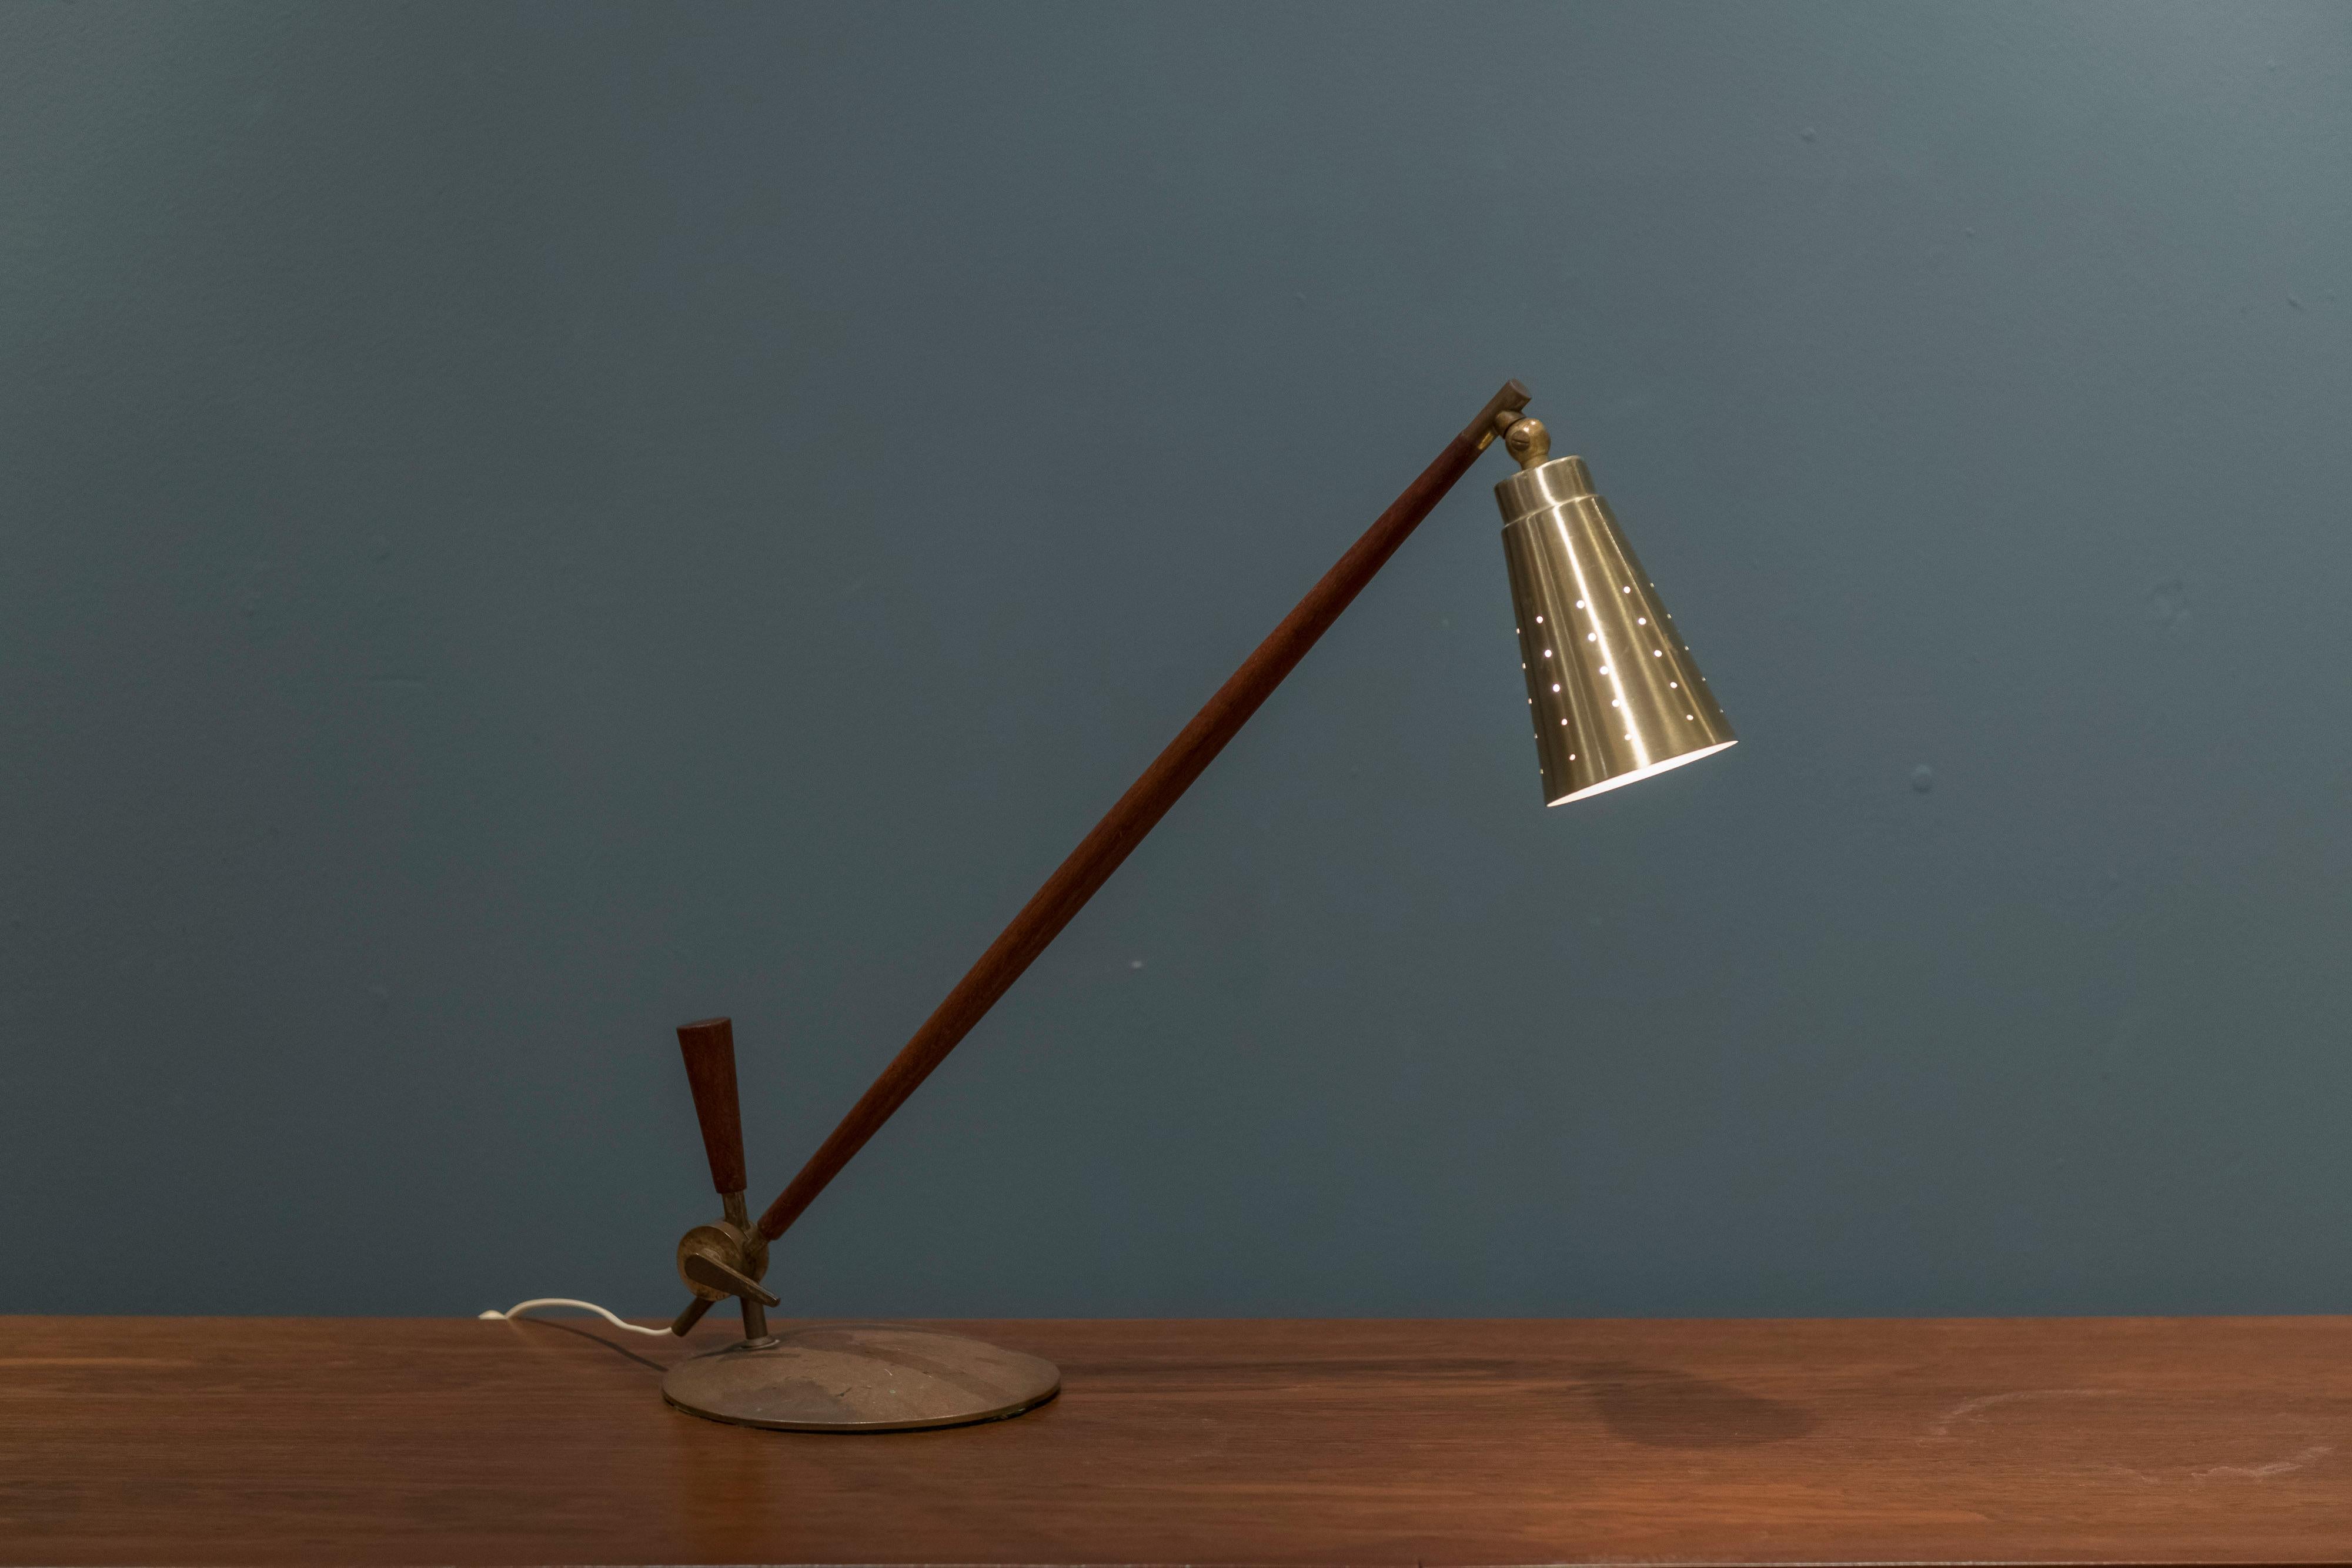 Tapio Wirkkala table lamp for Idman Oy, Finland. Pierced brass shade with teak and brass plated base and finishing’s. Lamp height is adjustable, newly rewired.